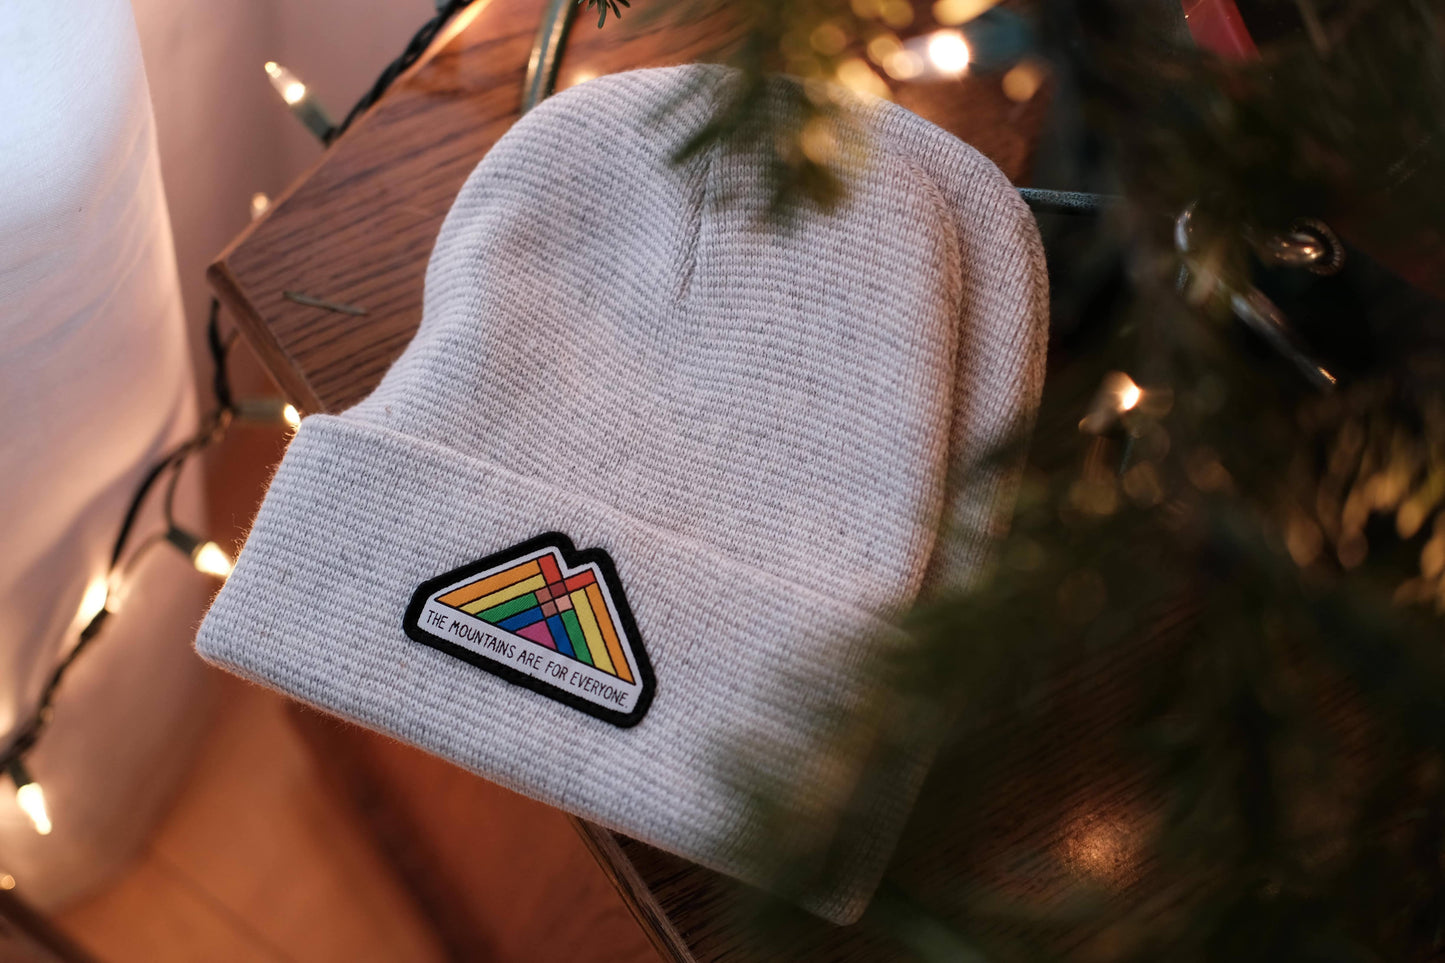 The Mountains are for everyone Upcycled Beanie